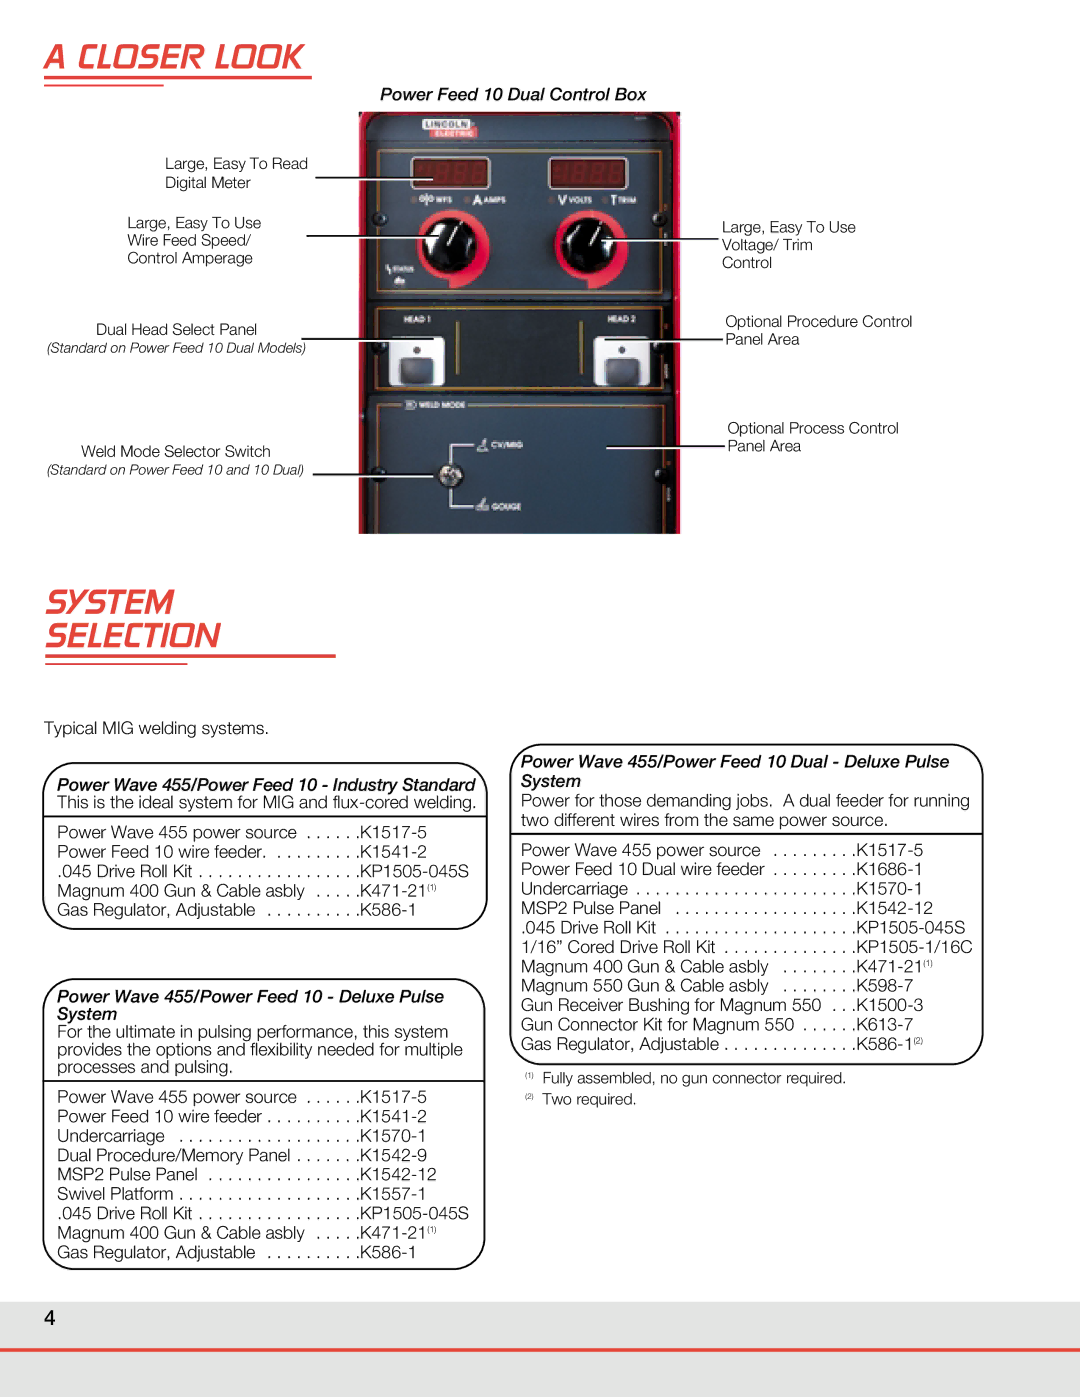 Lincoln Electric WELDING SYSTEMS manual Closer Look, System Selection 